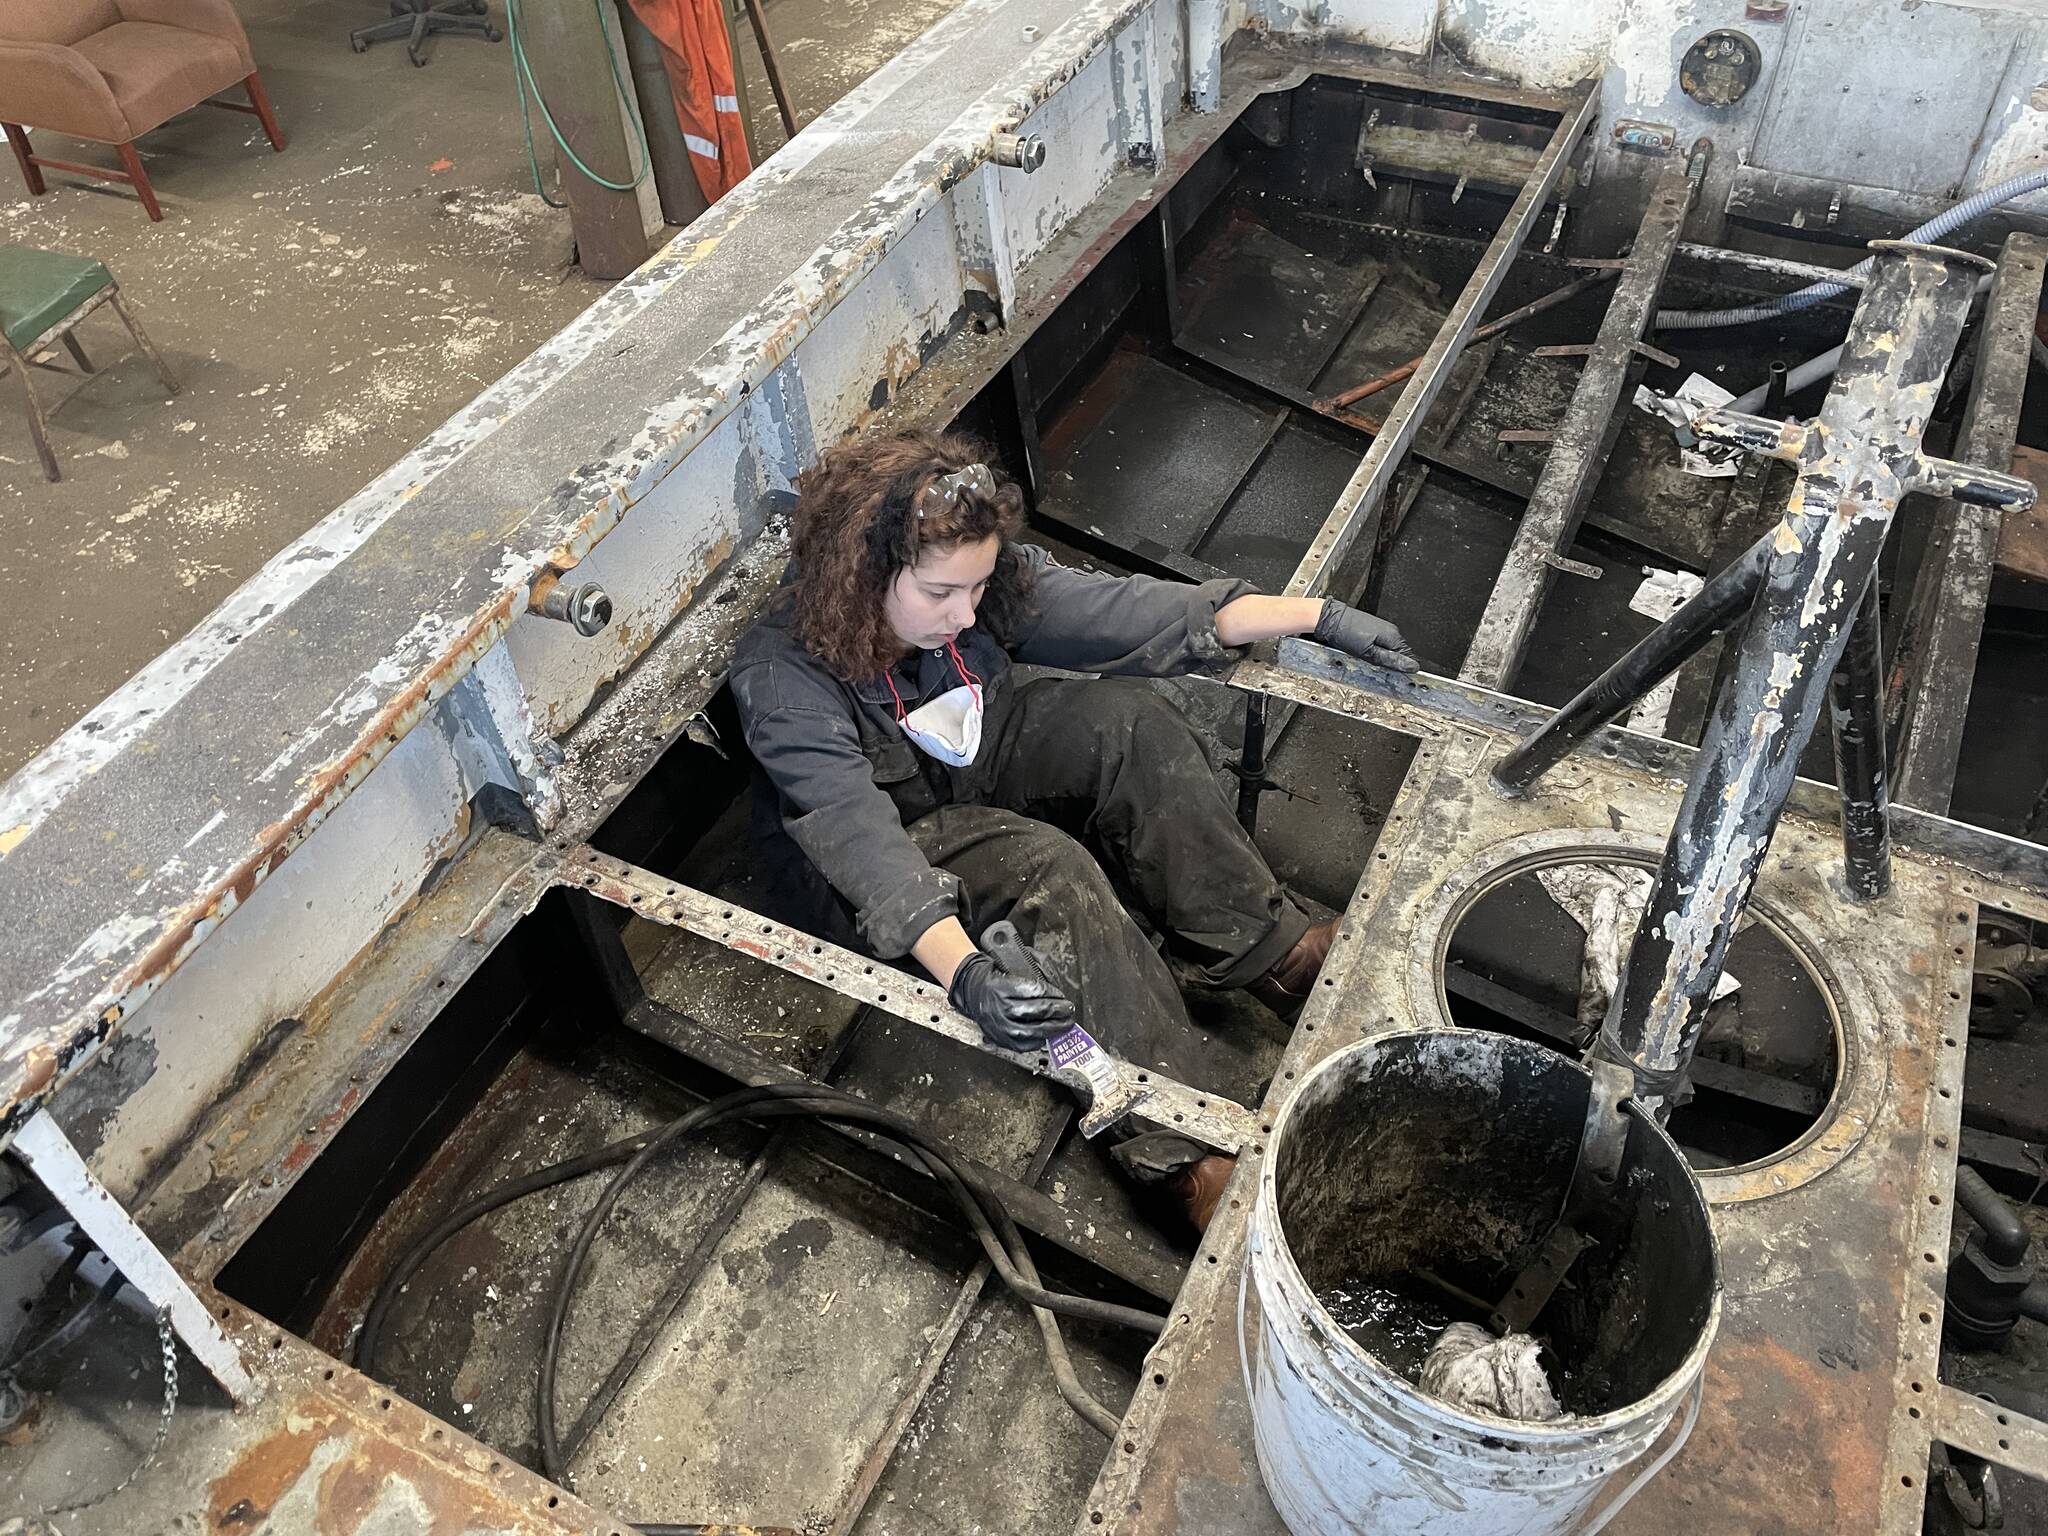 Michael S. Lockett / The Daily World 
Hannah Baldwin, a student with the Ocosta High School’s Maritime afterschool program, cleans bilges part of a boat restoration on Nov. 9.